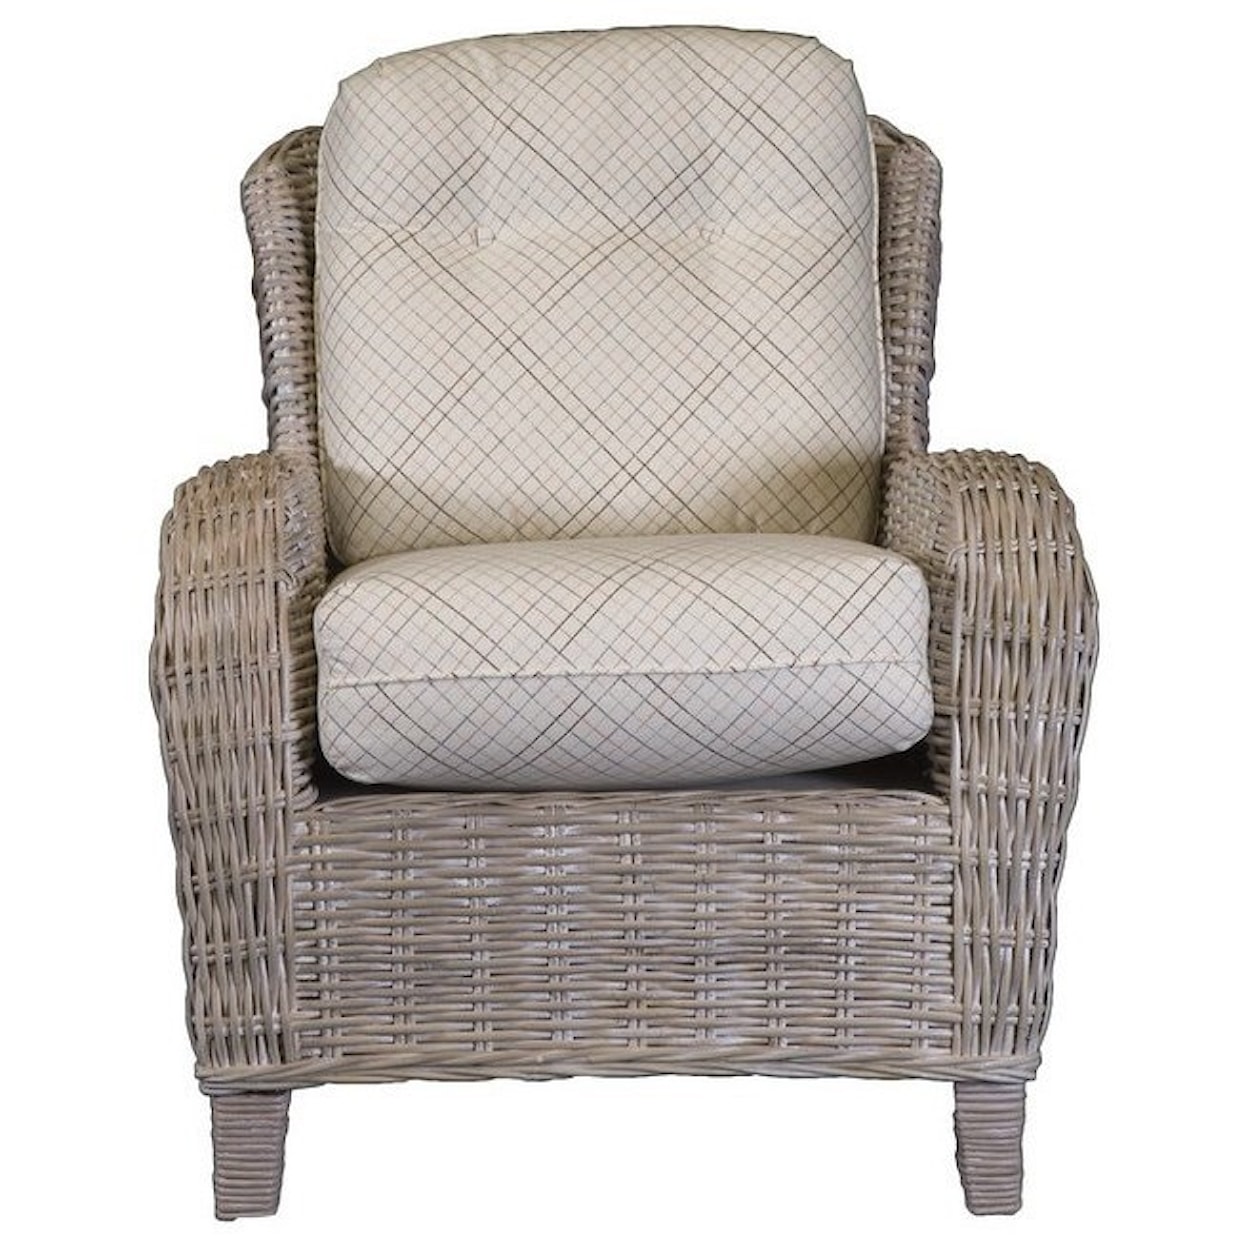 Capris Furniture Chairs and Ottomans Wicker Accent Chair